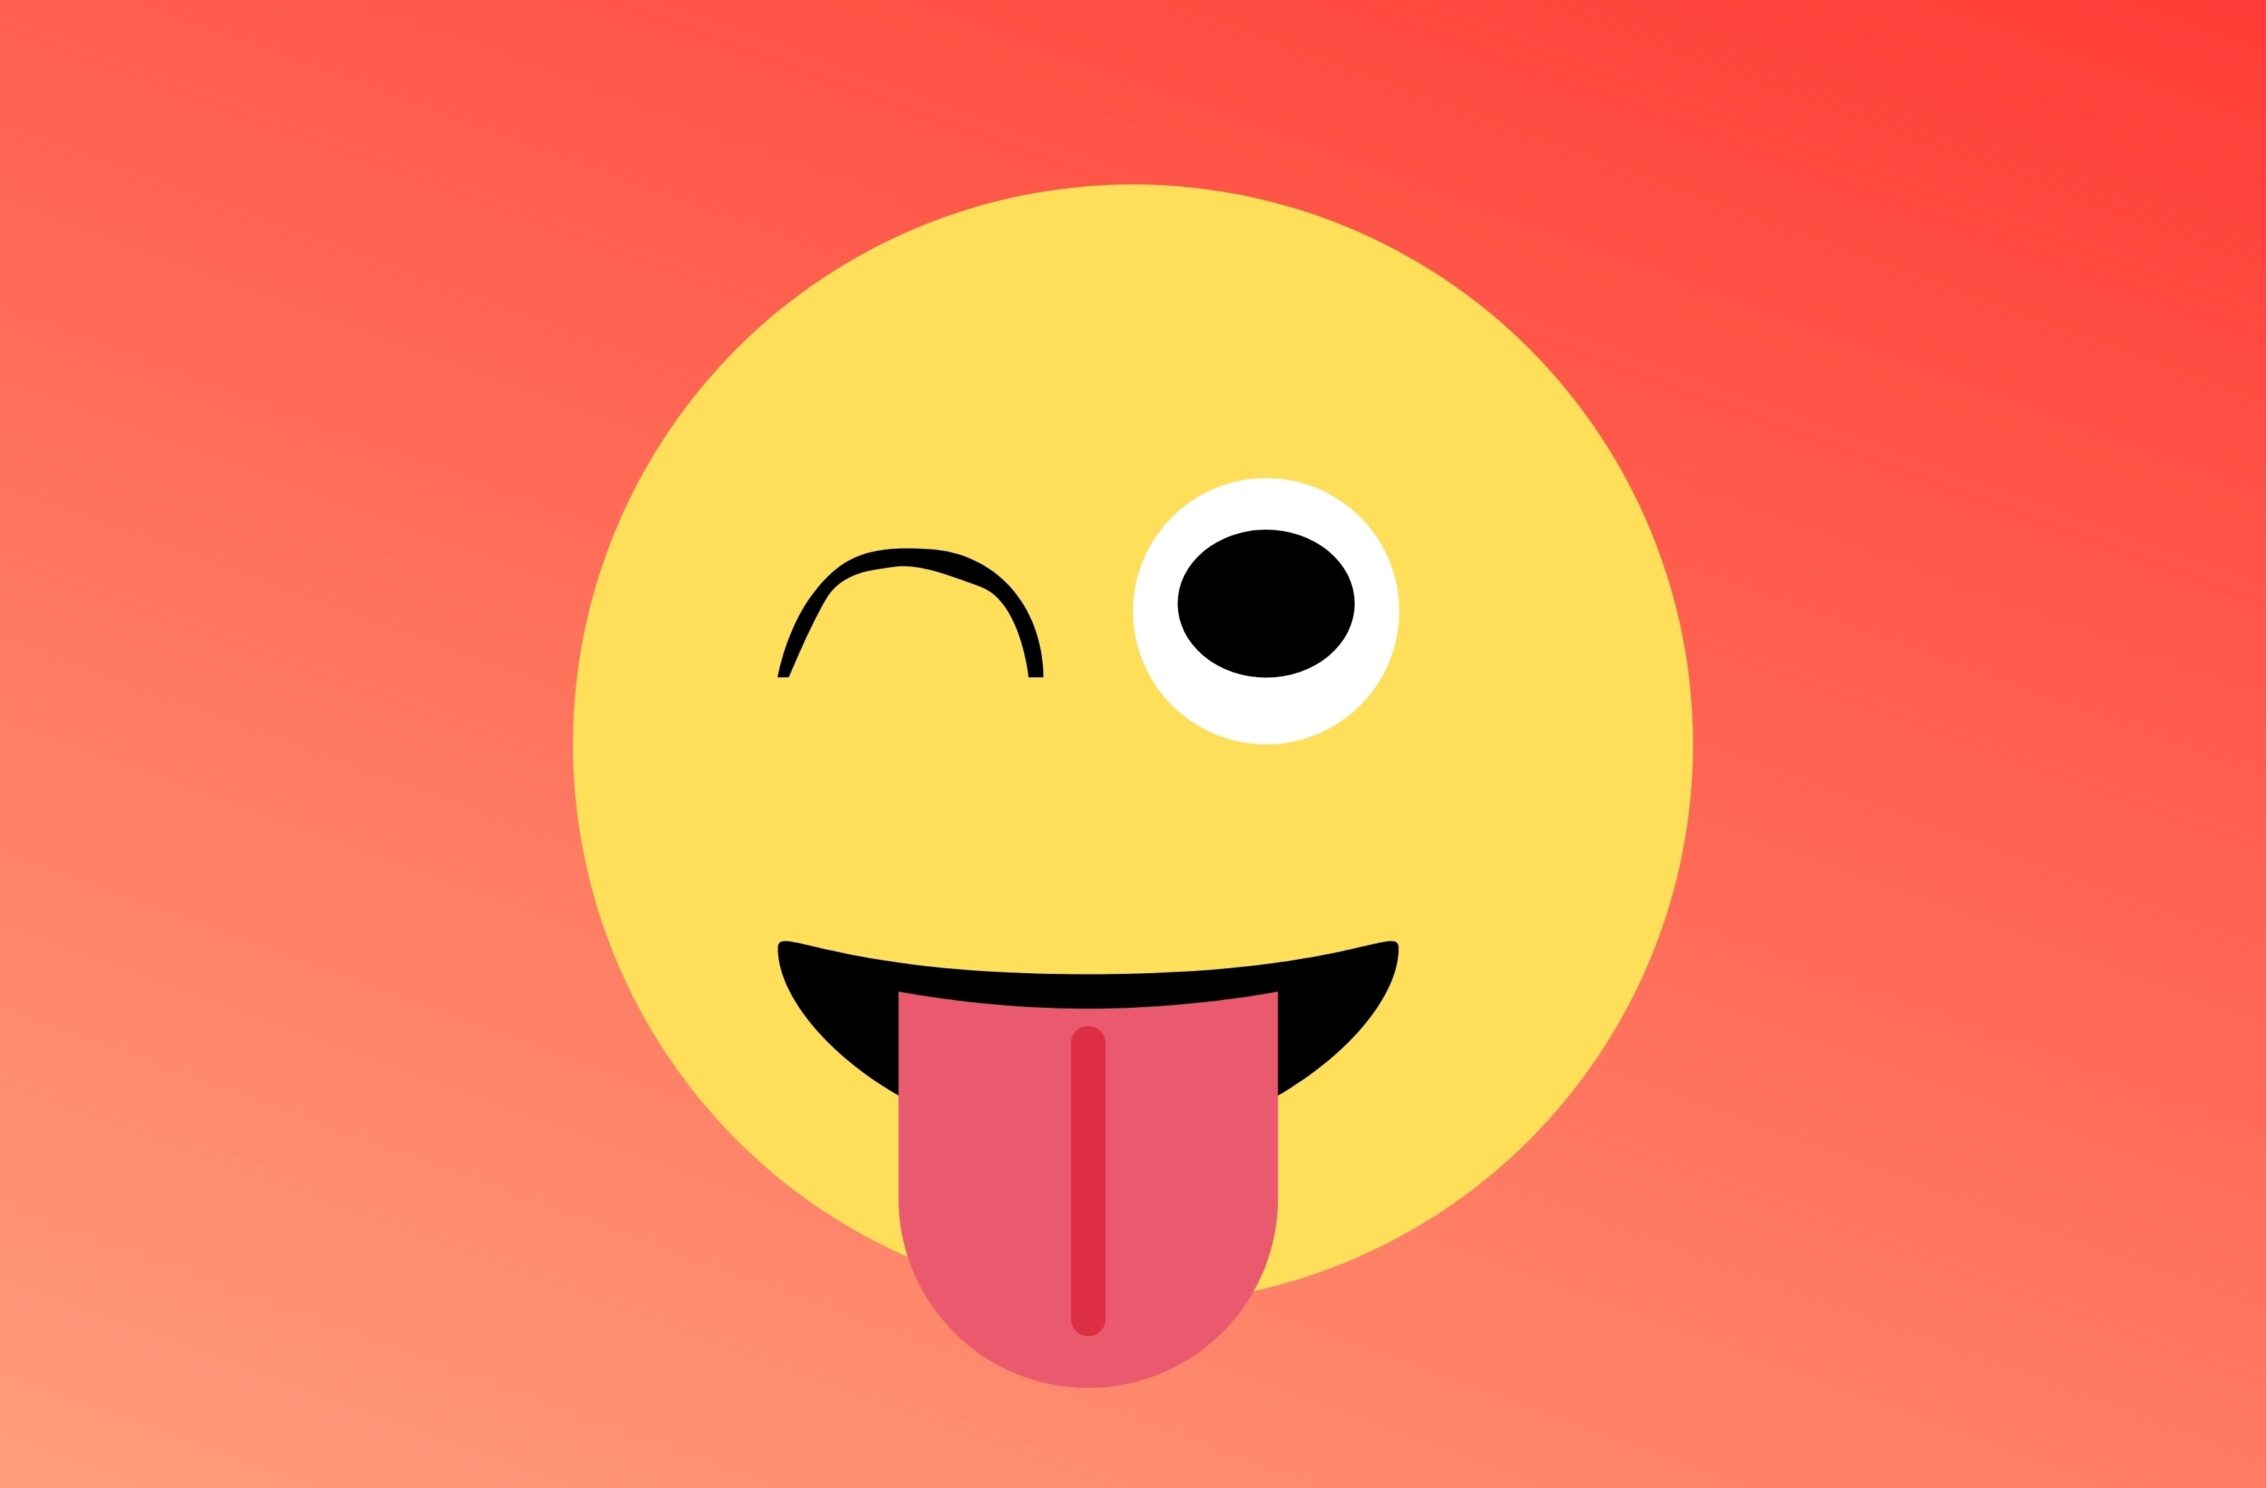 2266x1488 wallpaper Winking Face Tongue Red Background iPad Wallpaper 2266x1488 pixels resolution